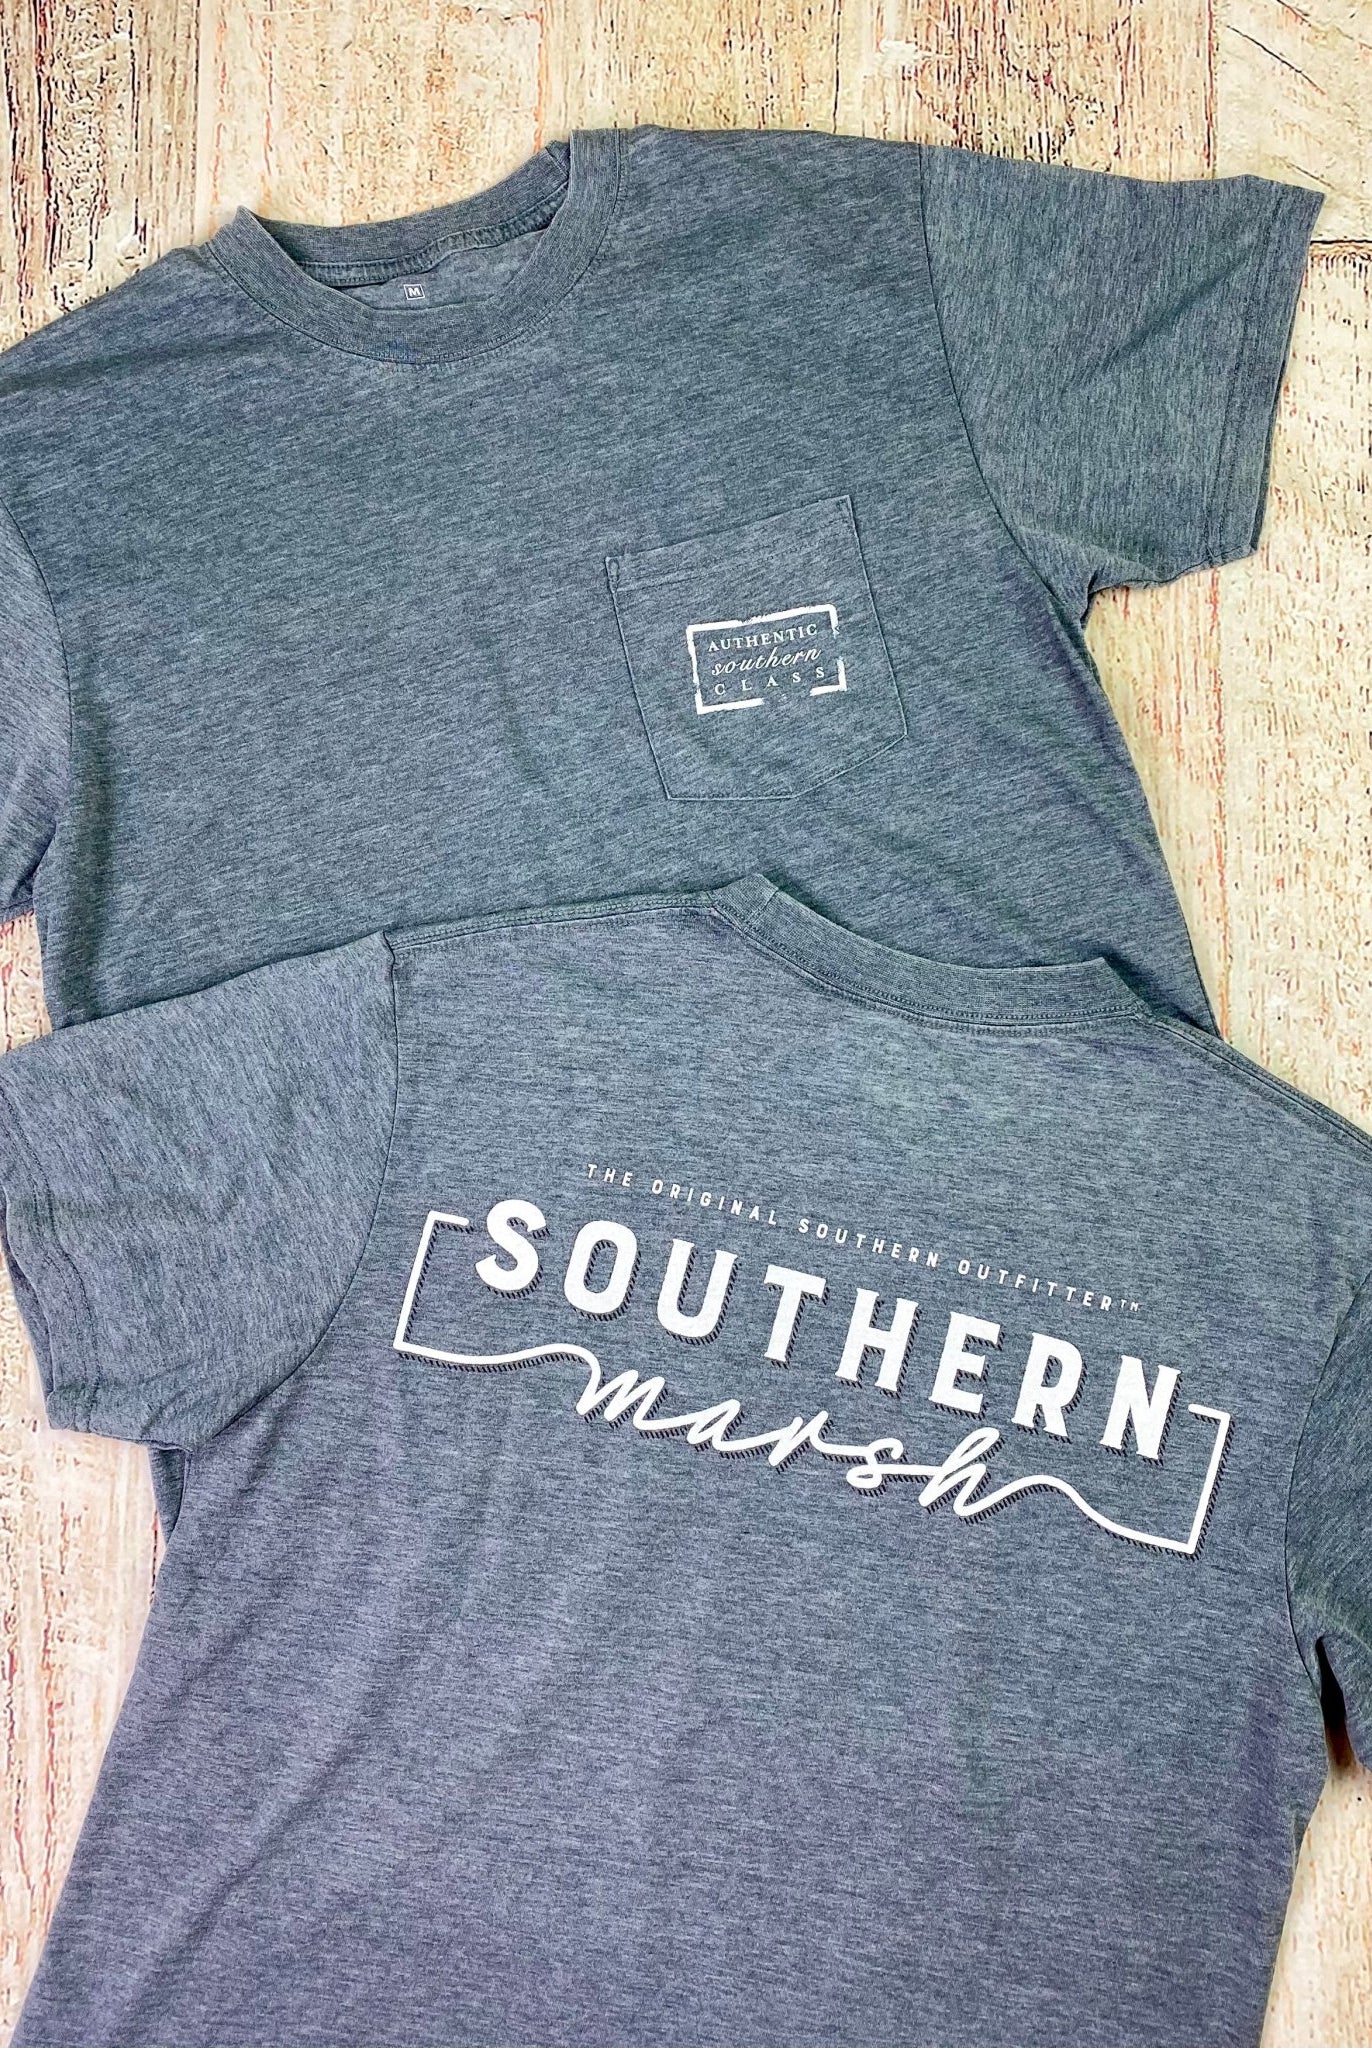 Southern Marsh Seawash Tee - Waves - Midnight Grey - Graphic Tee -Jimberly's Boutique-Olive Branch-Mississippi